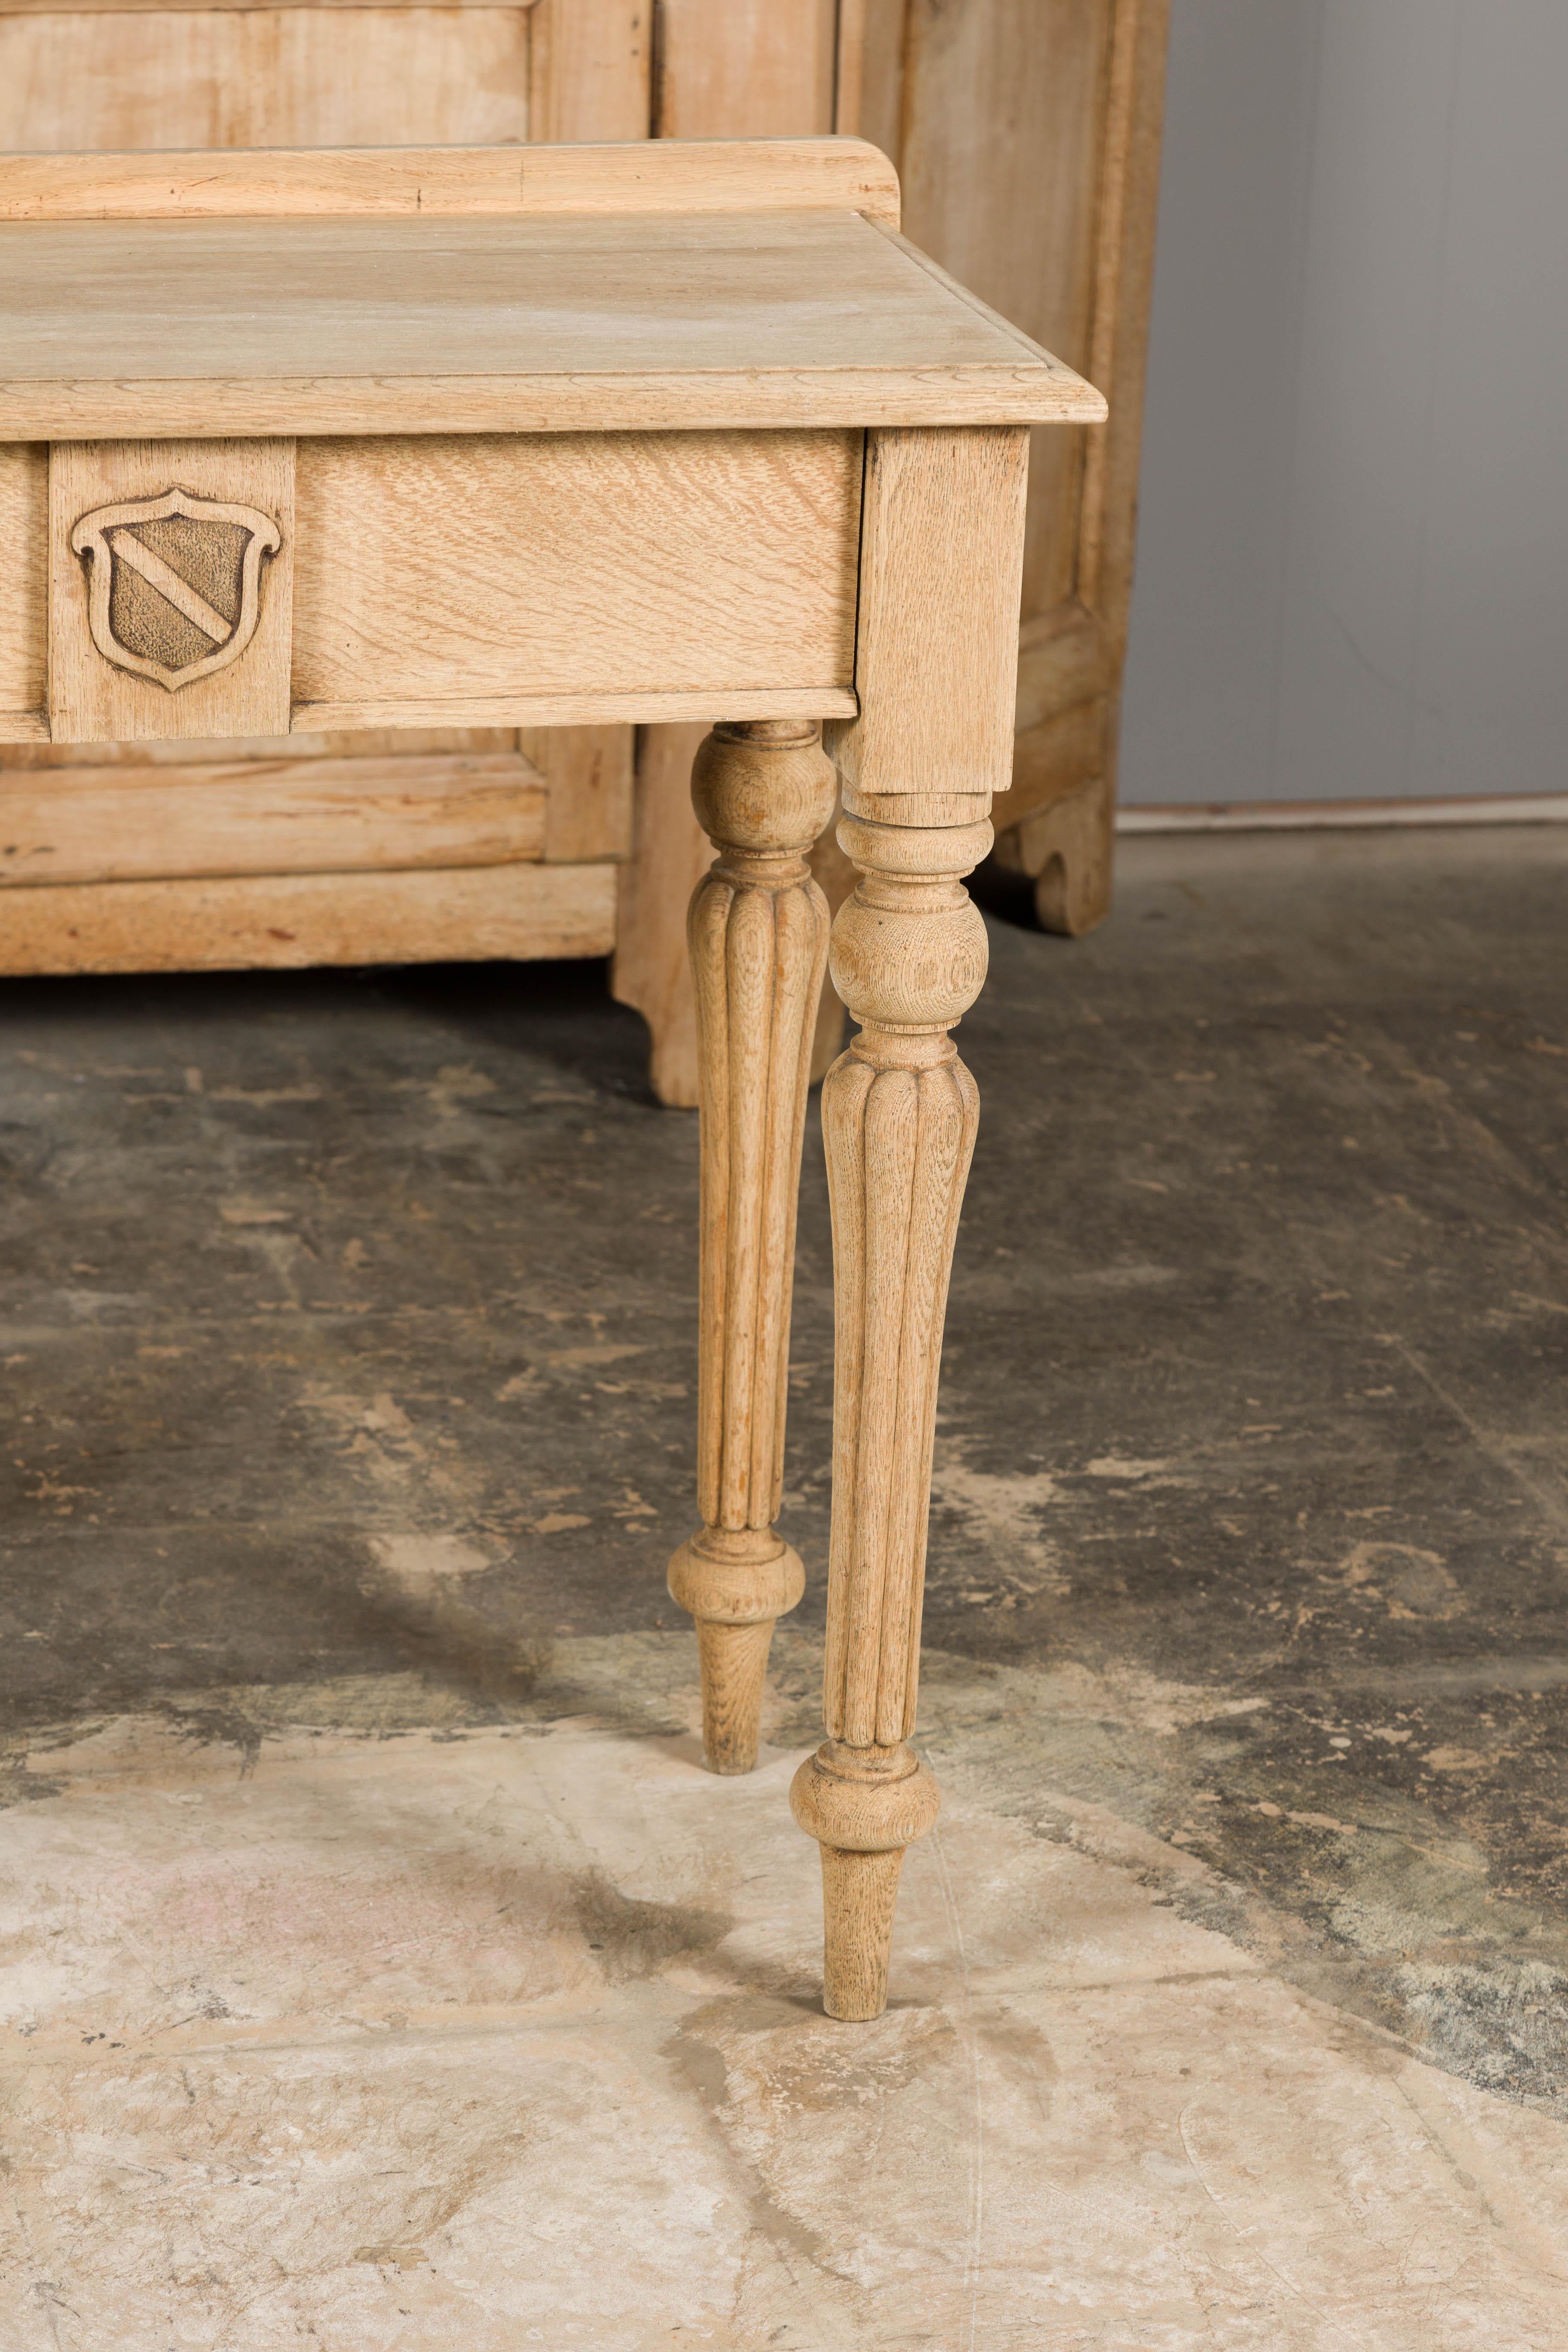 19th Century English Bleached Oak Side Table with Carved Shield Motif For Sale 6